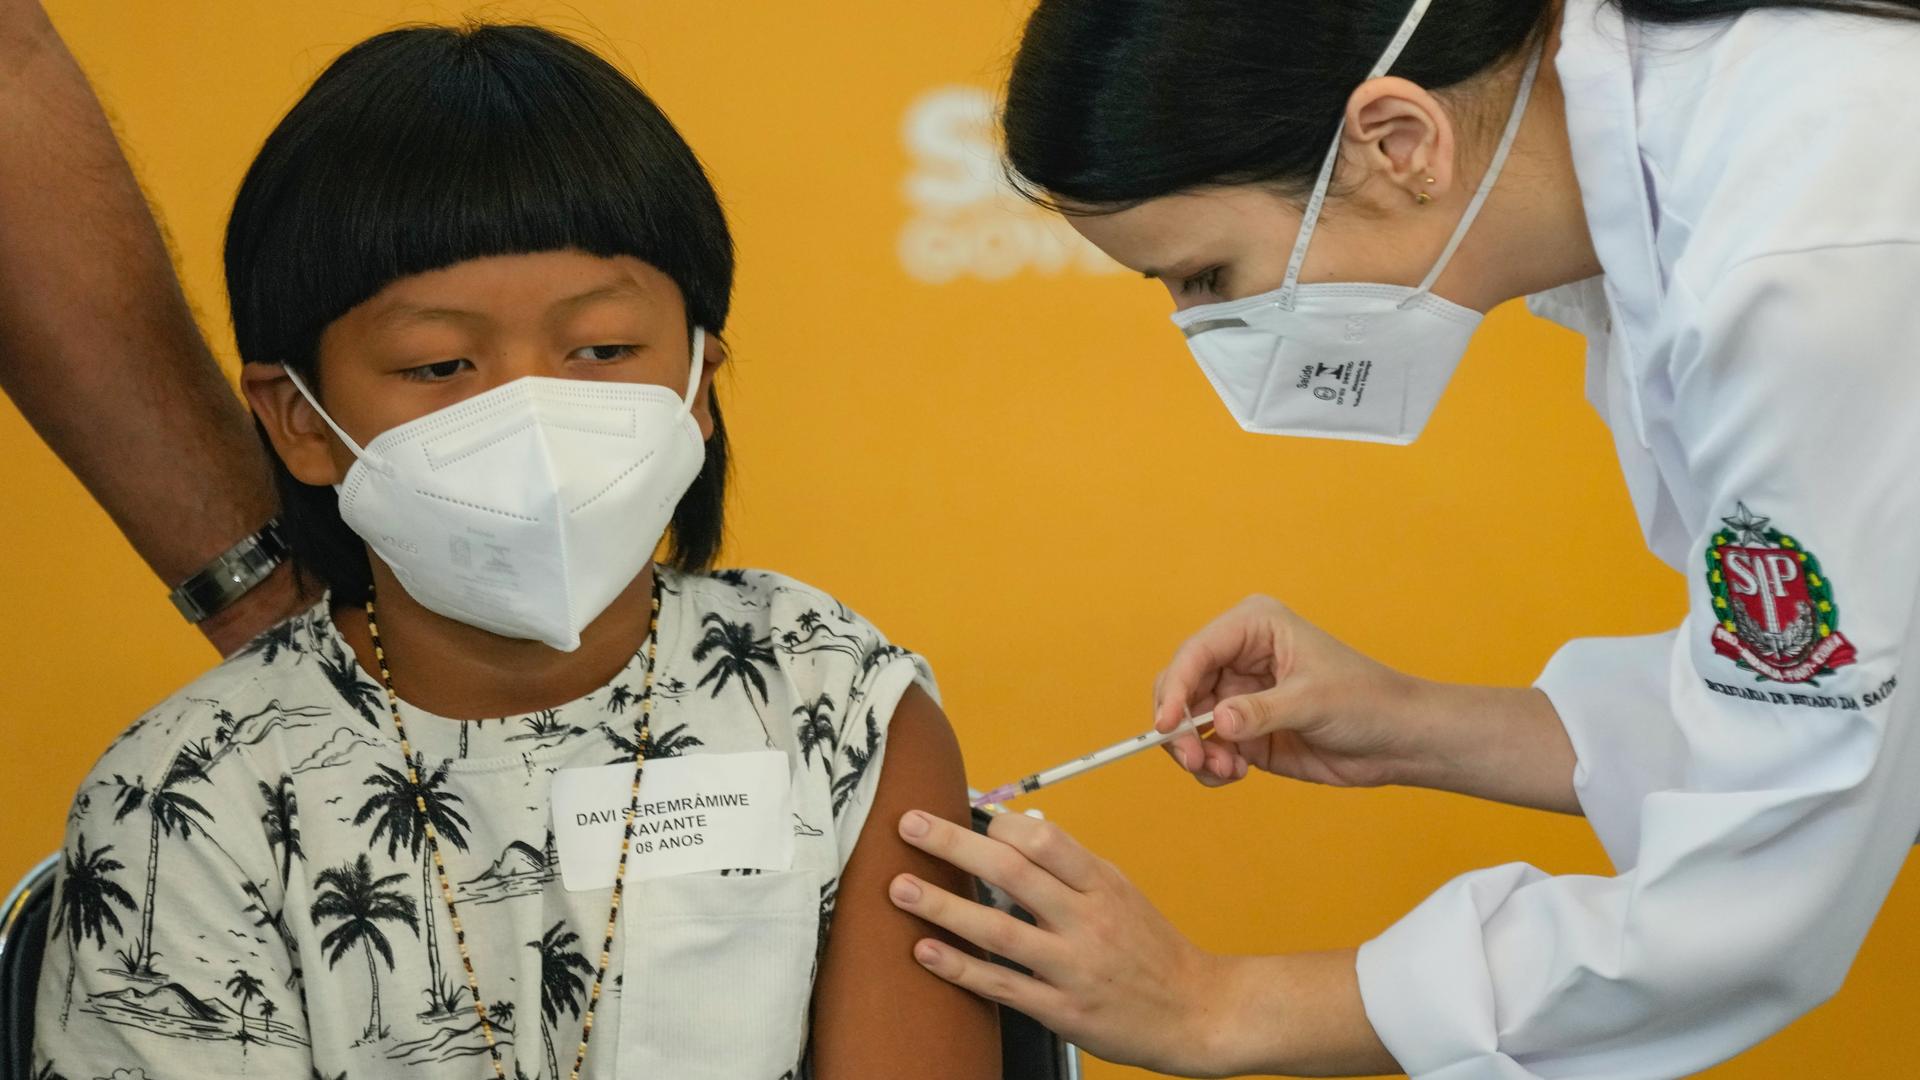 A health worker gives a shot of the Pfizer COVID-19 vaccine to 8-year-old Indigenous youth Davi Seremramiwe Xavante at the Hospital da Clinicas in São Paulo, Brazil, Jan. 14, 2022. 